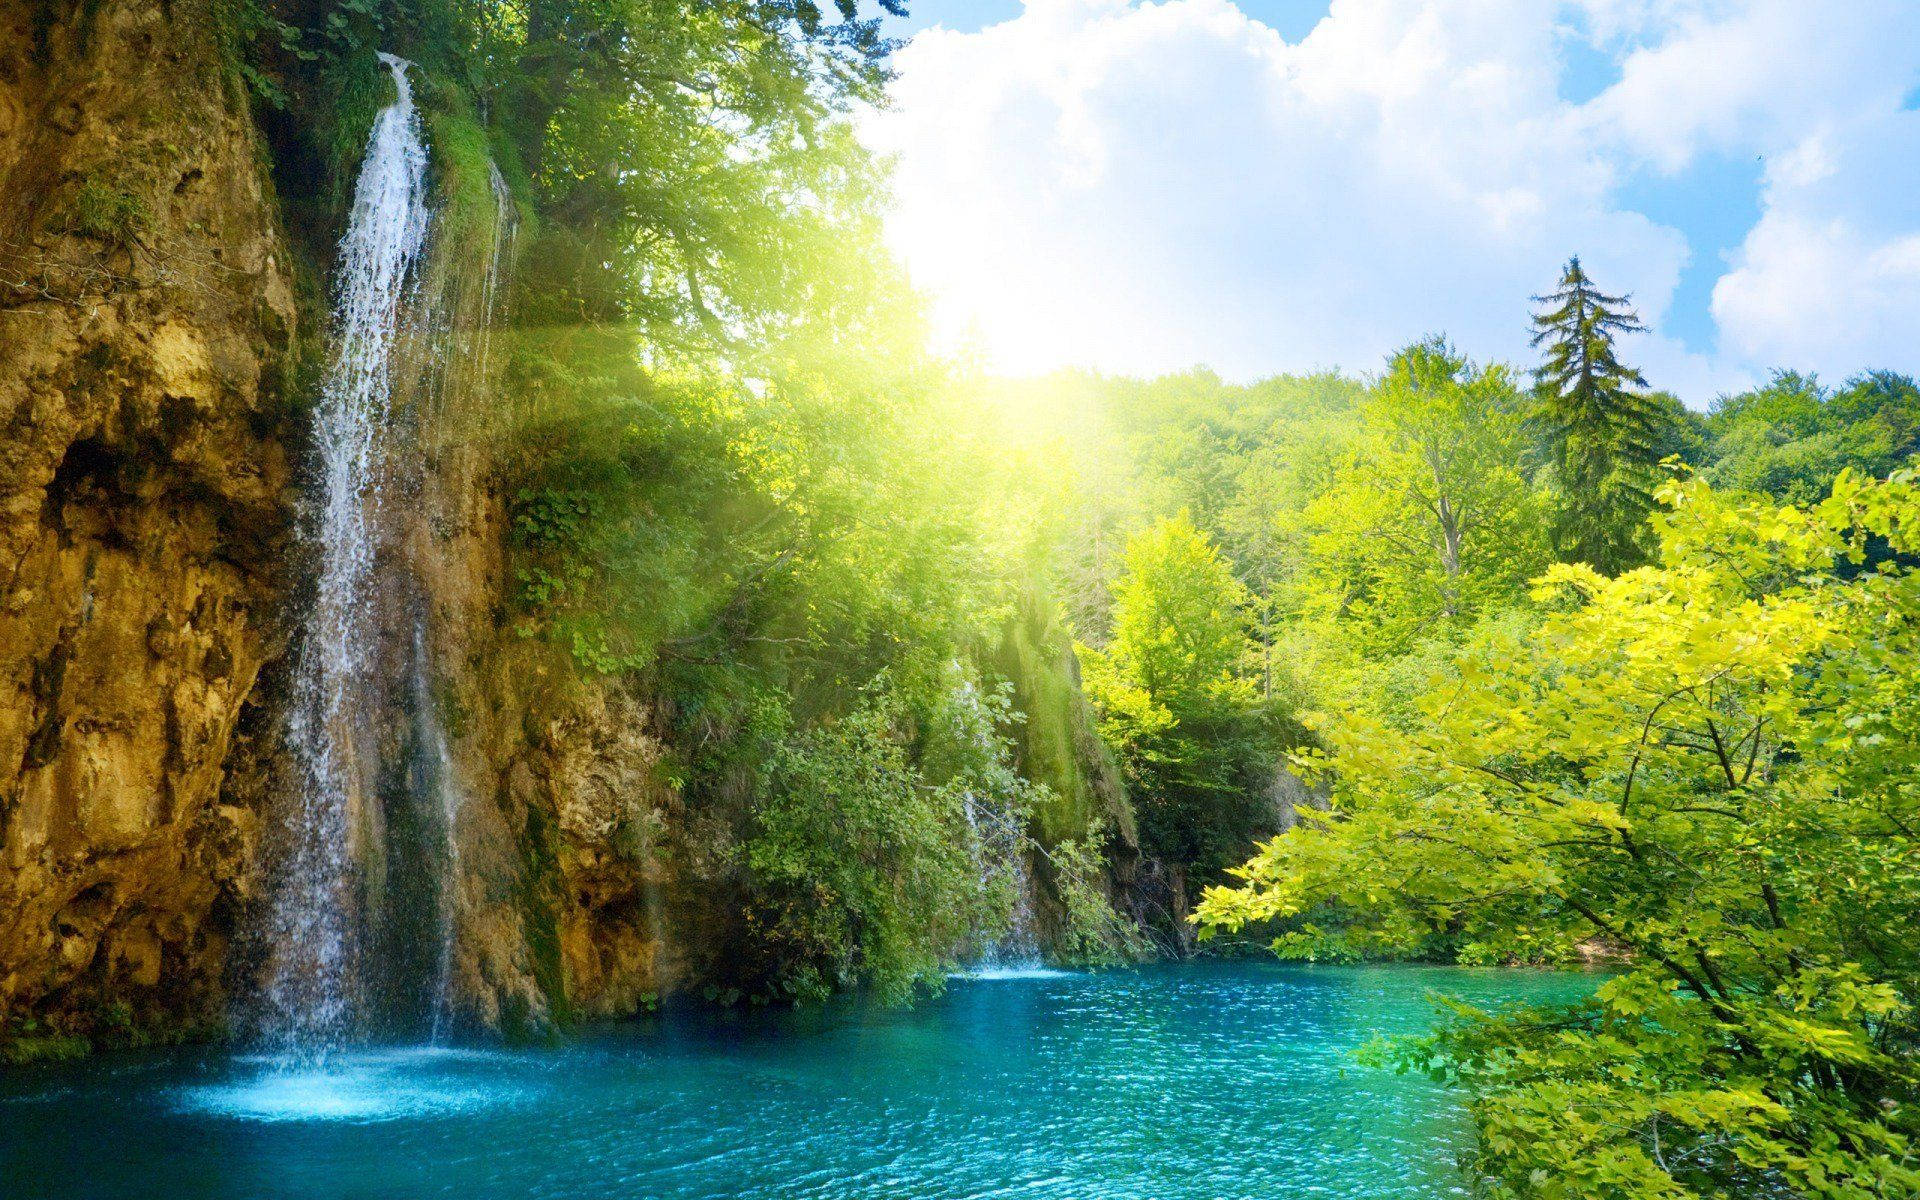 Take A Trip To Plitvice National Park, Croatia, To Experience The Mesmerizing Beauty Of The Peaks And Valleys Of This Incredible Waterfall. Wallpaper